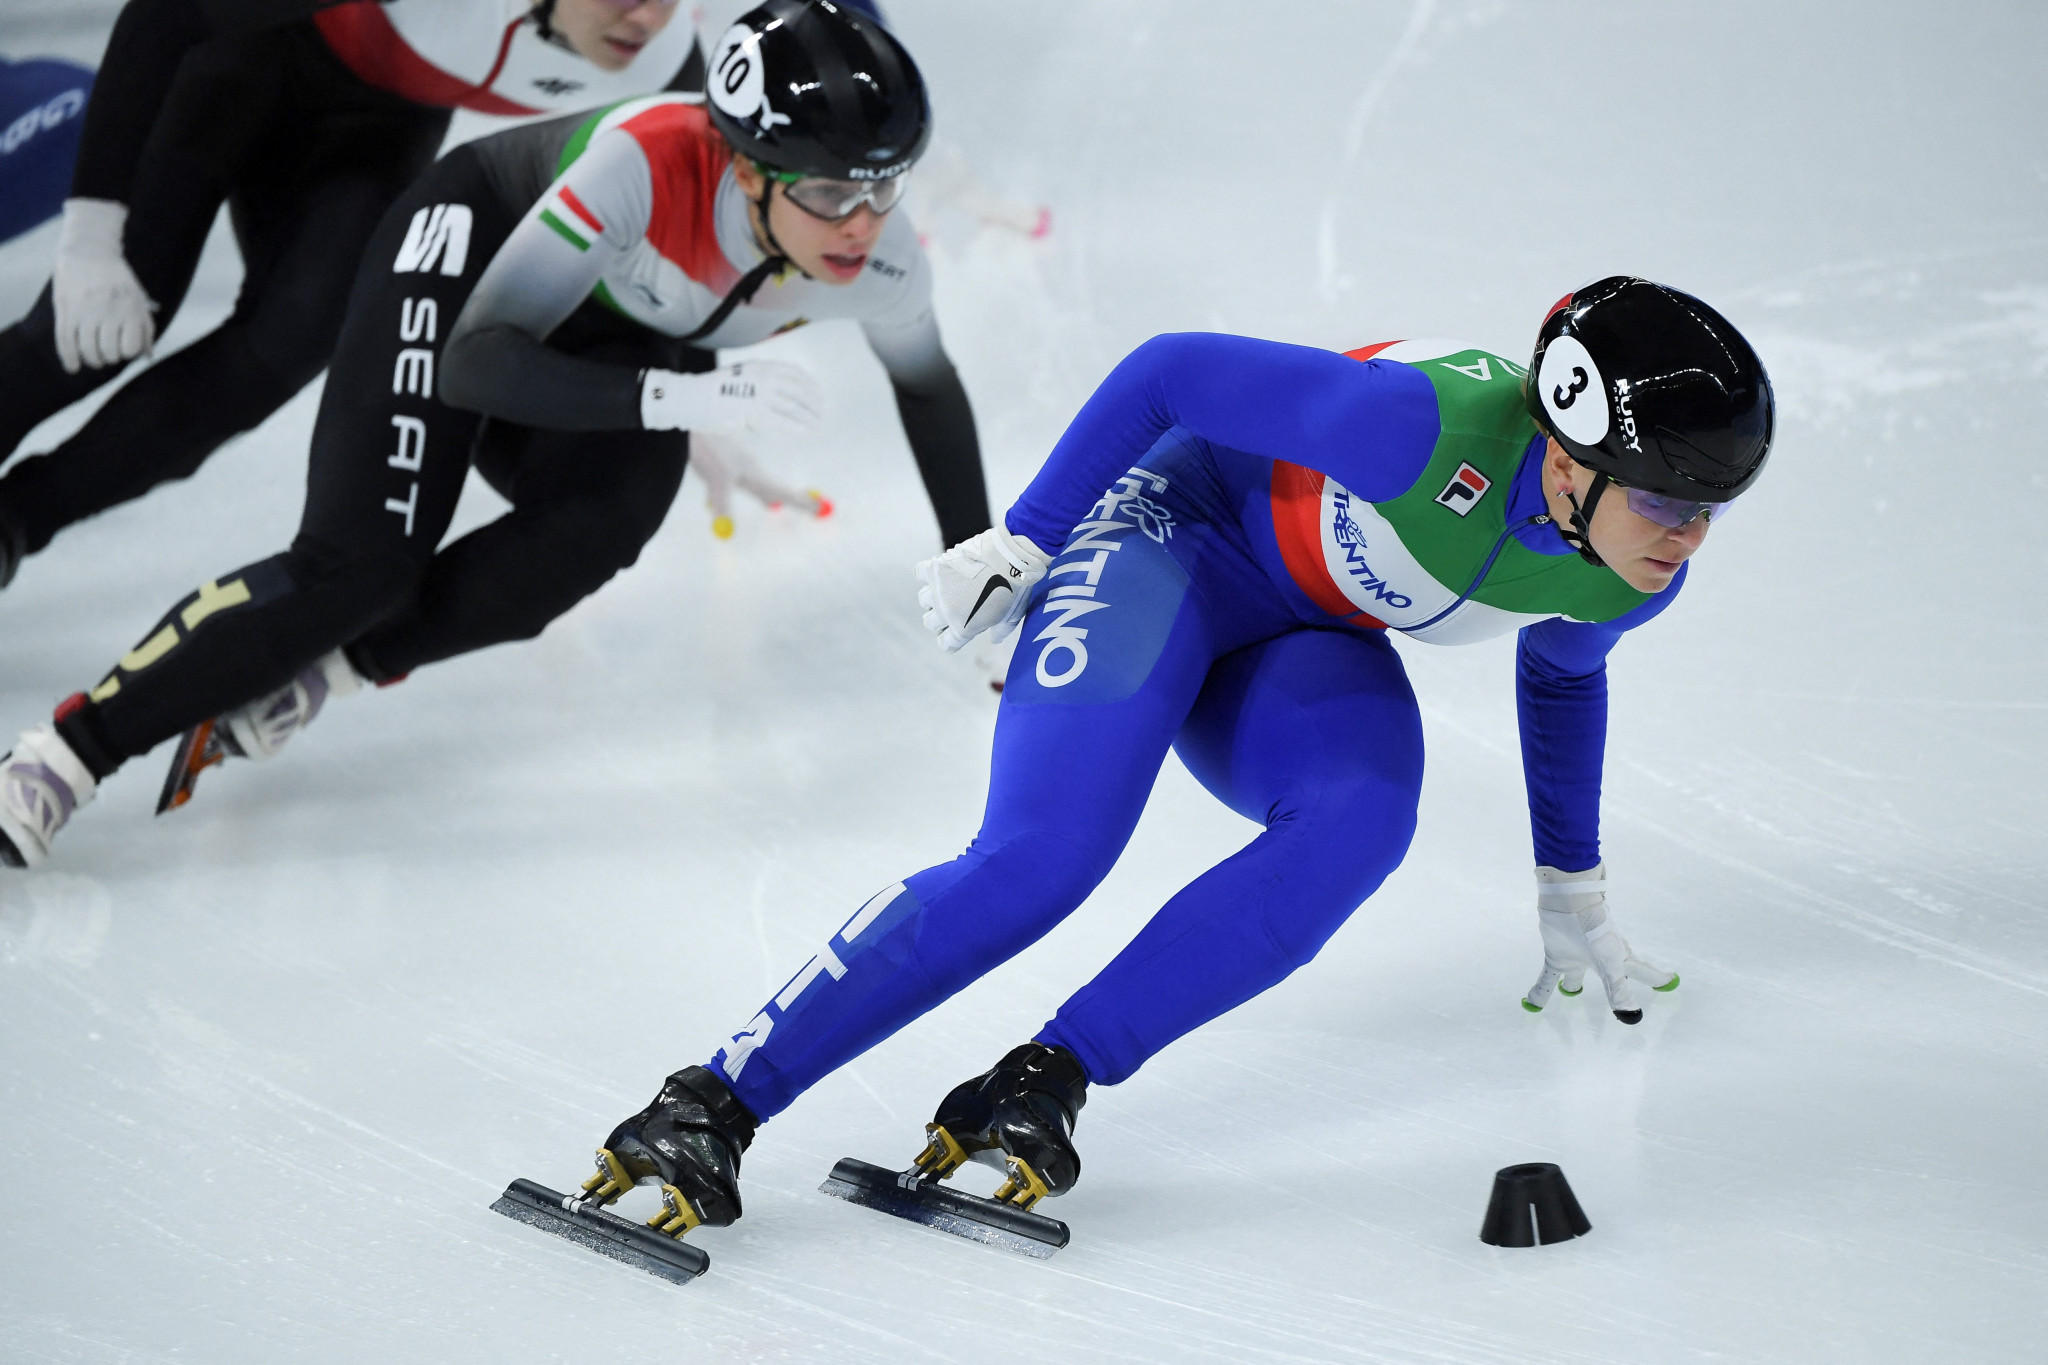 Arianna Fontana won the women's 500m at the ISU Short Track Speed Skating World Cup event in Nagoya ©Getty Images